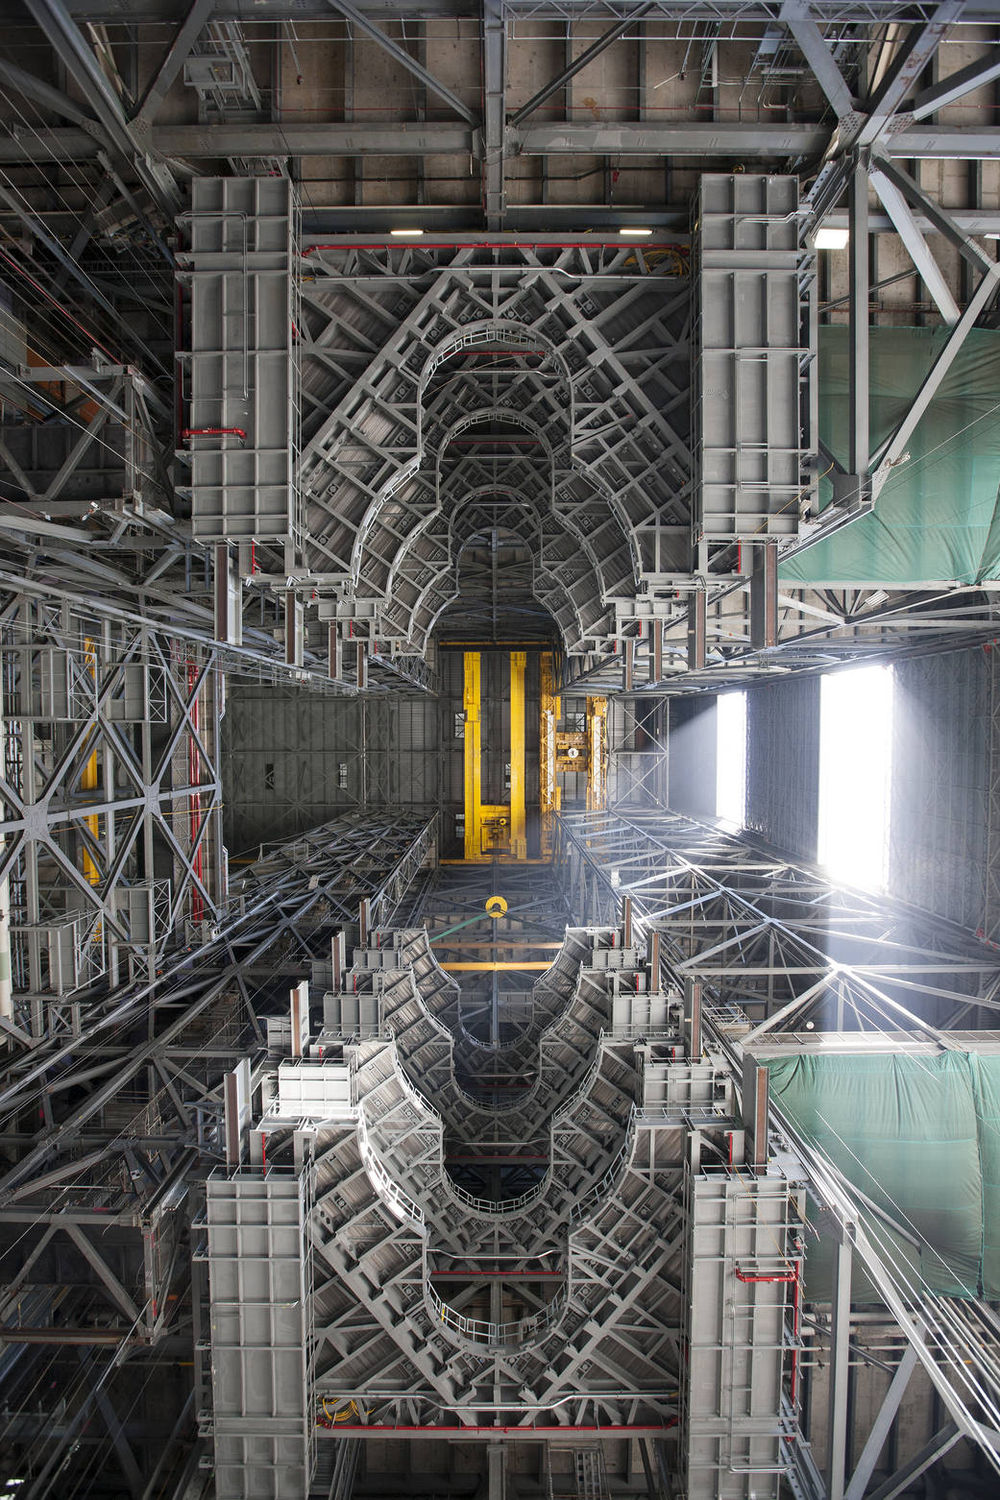 A unique view of the Vehicle Assembly Building (VAB) at NASA’s Kennedy Space Center.